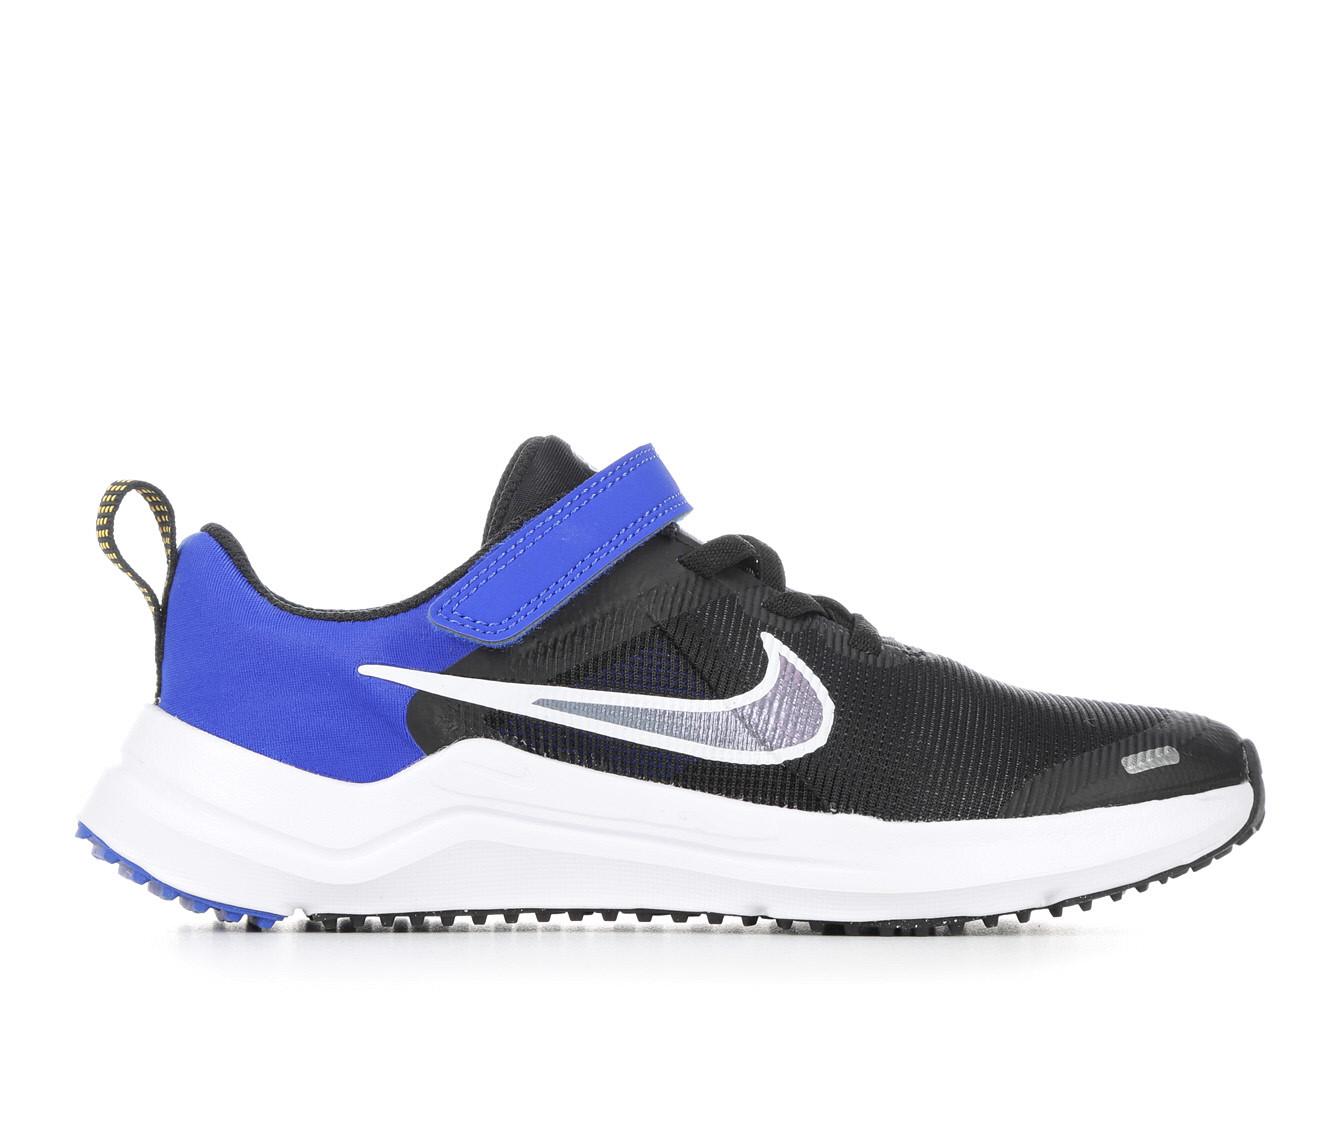 Nike Boys Running Shoes Only $19.98 (Regularly $40) at Academy